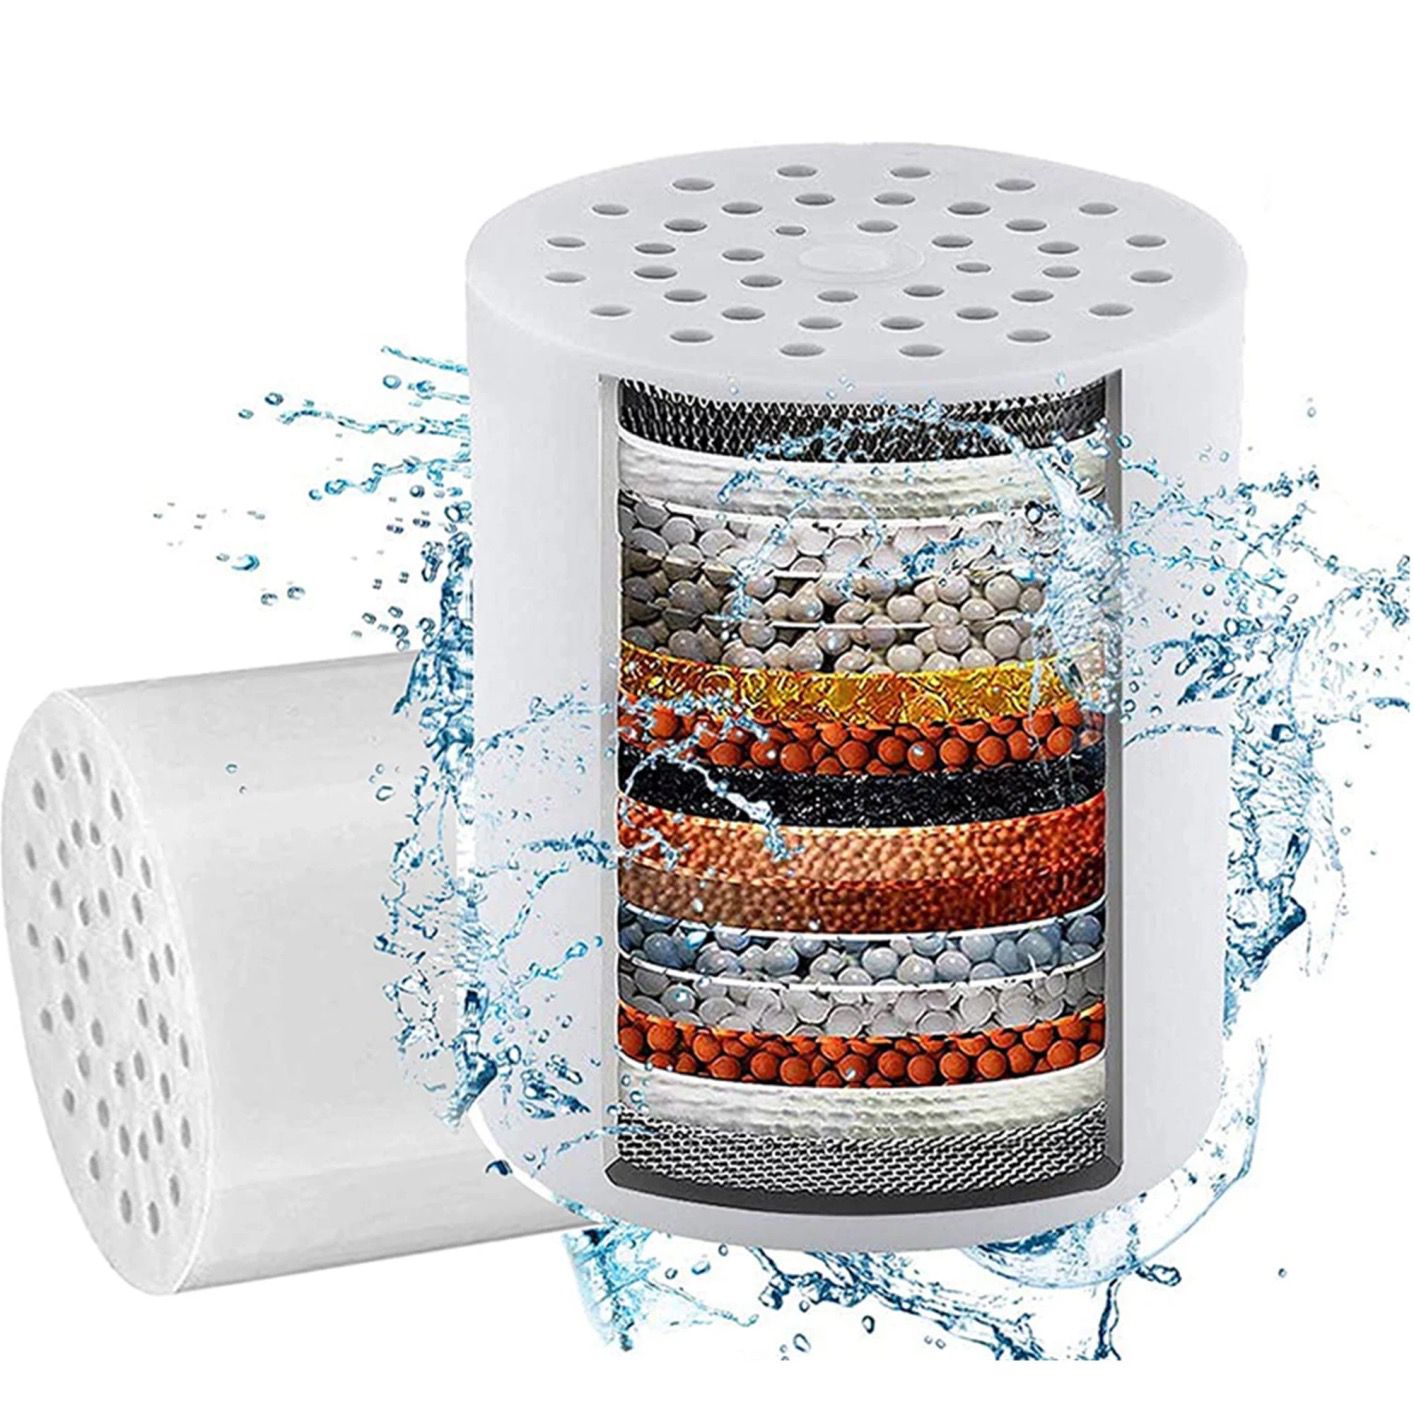 Buy Shower Filter Replacement Cartridge Online | Construction Finishes | Qetaat.com